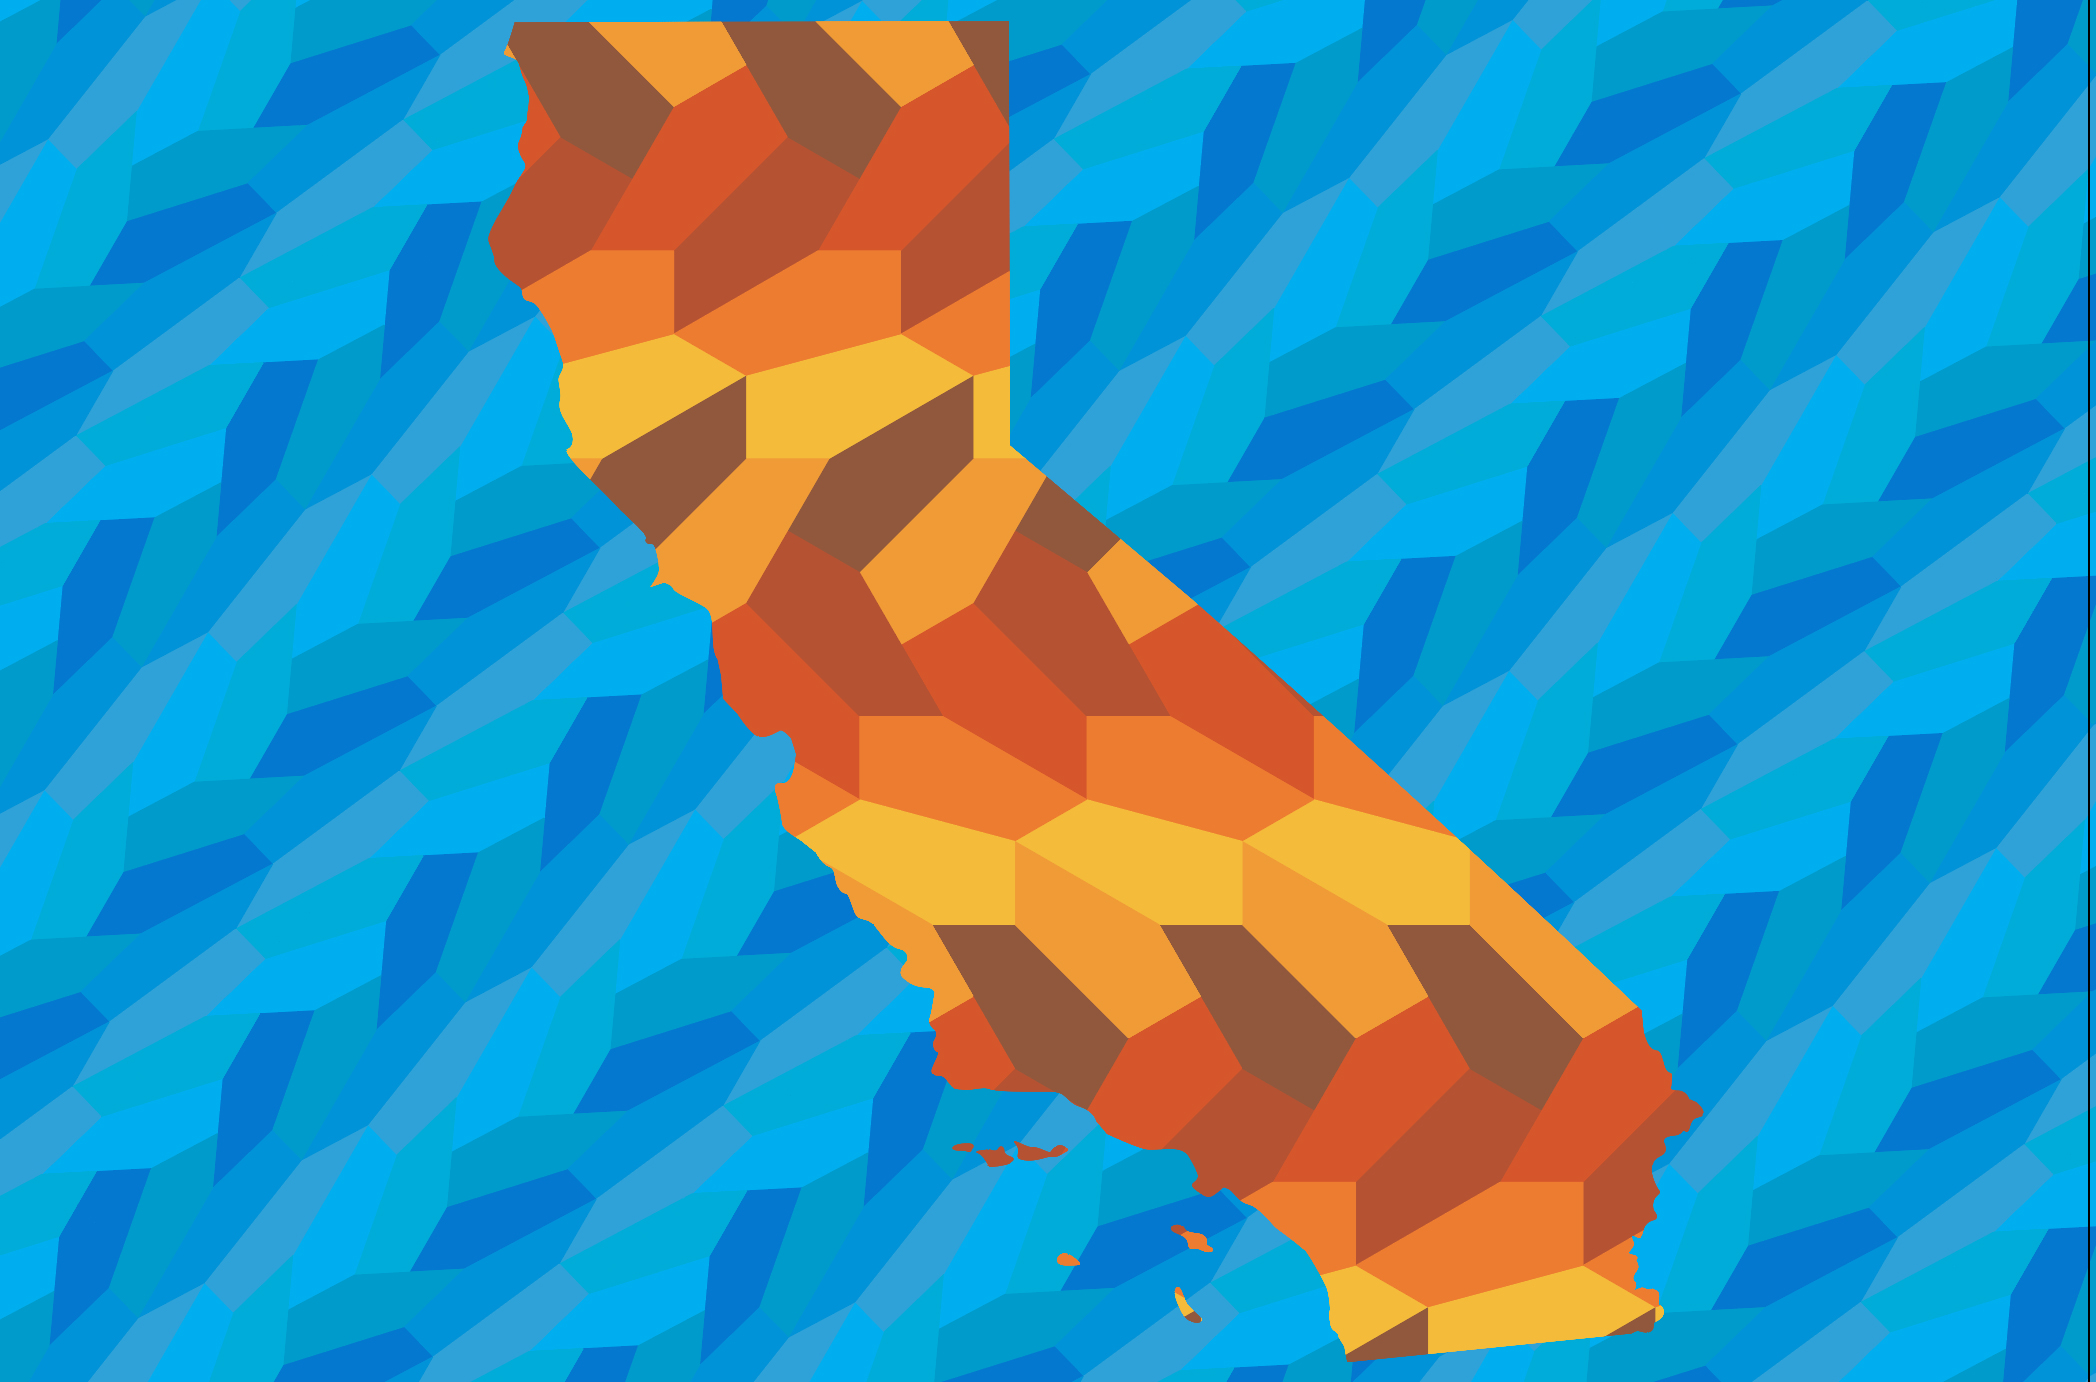 California silhouette with two pentagon patterns applied